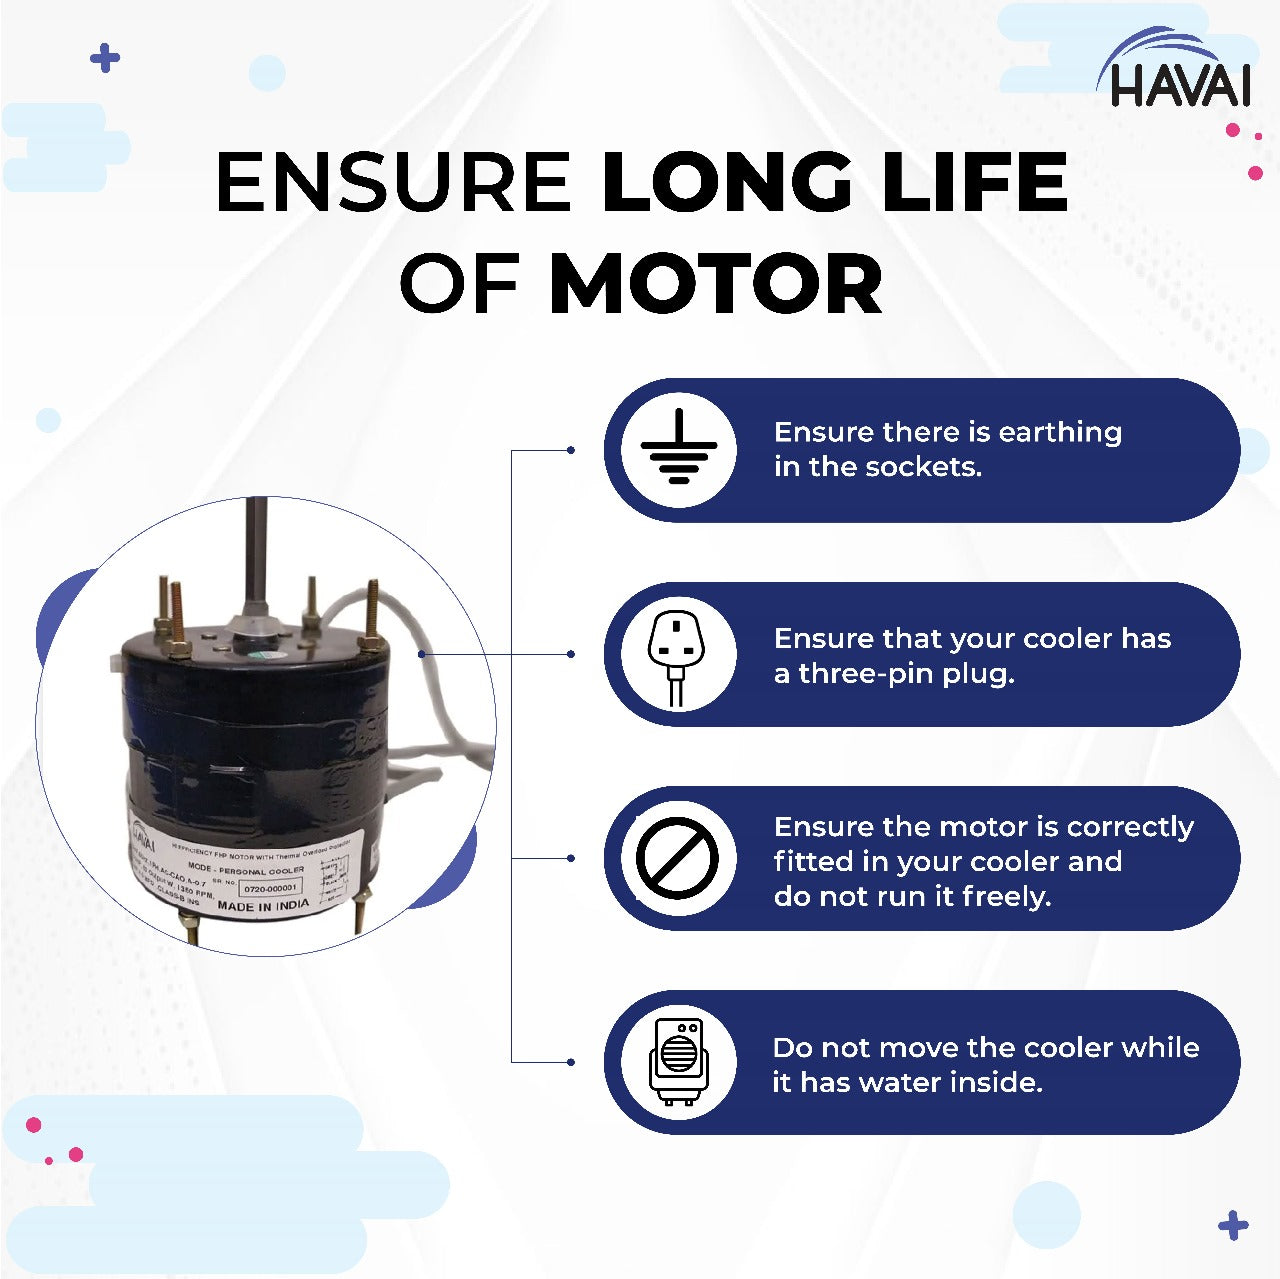 Main/Electric Motor - For Havai Bullet XL 34 Litre Tower Cooler